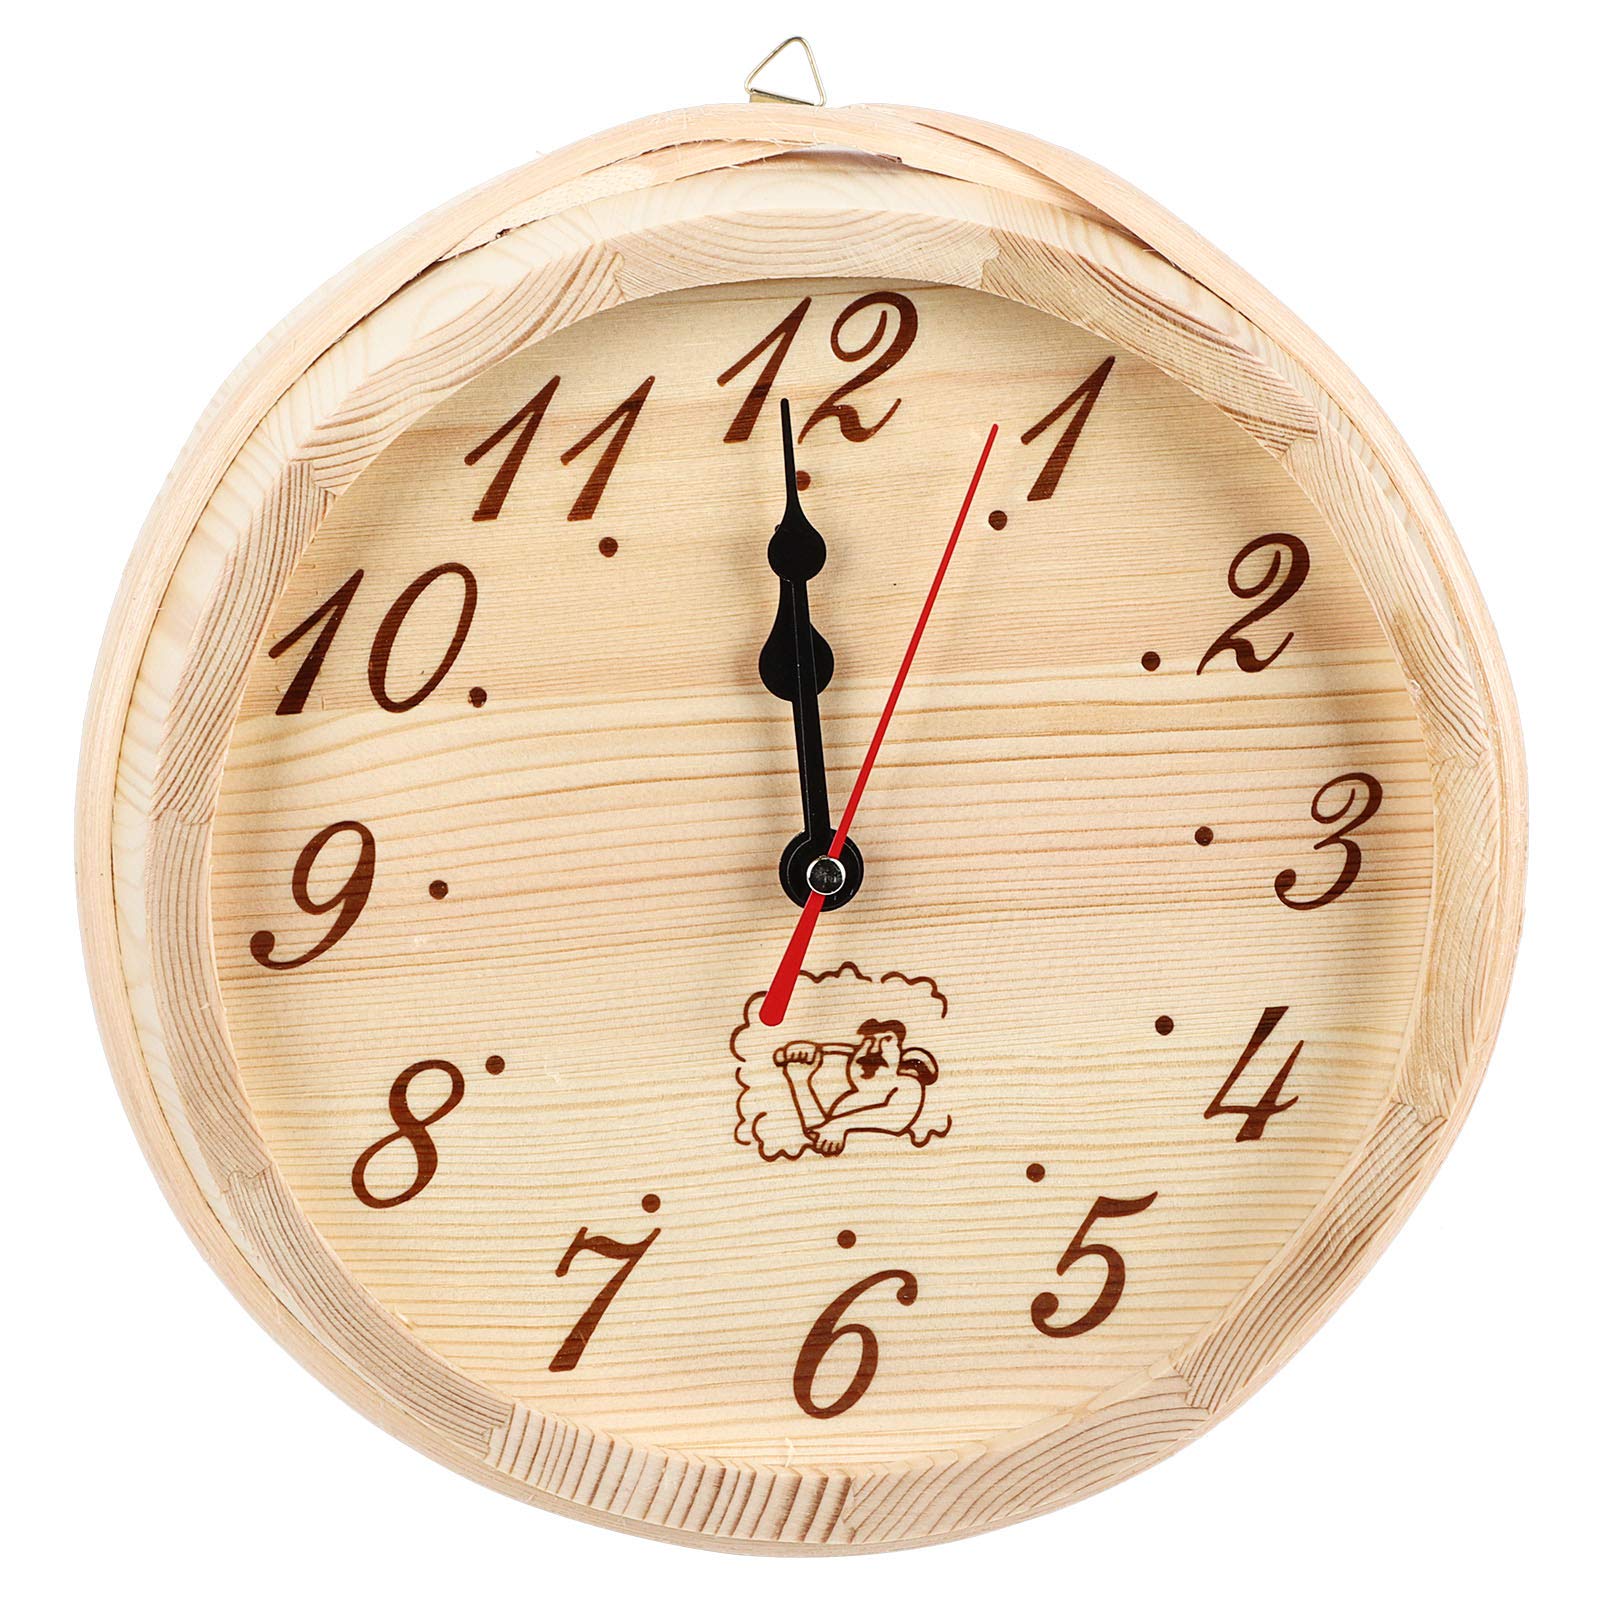 A simple image of a clock or a timer.